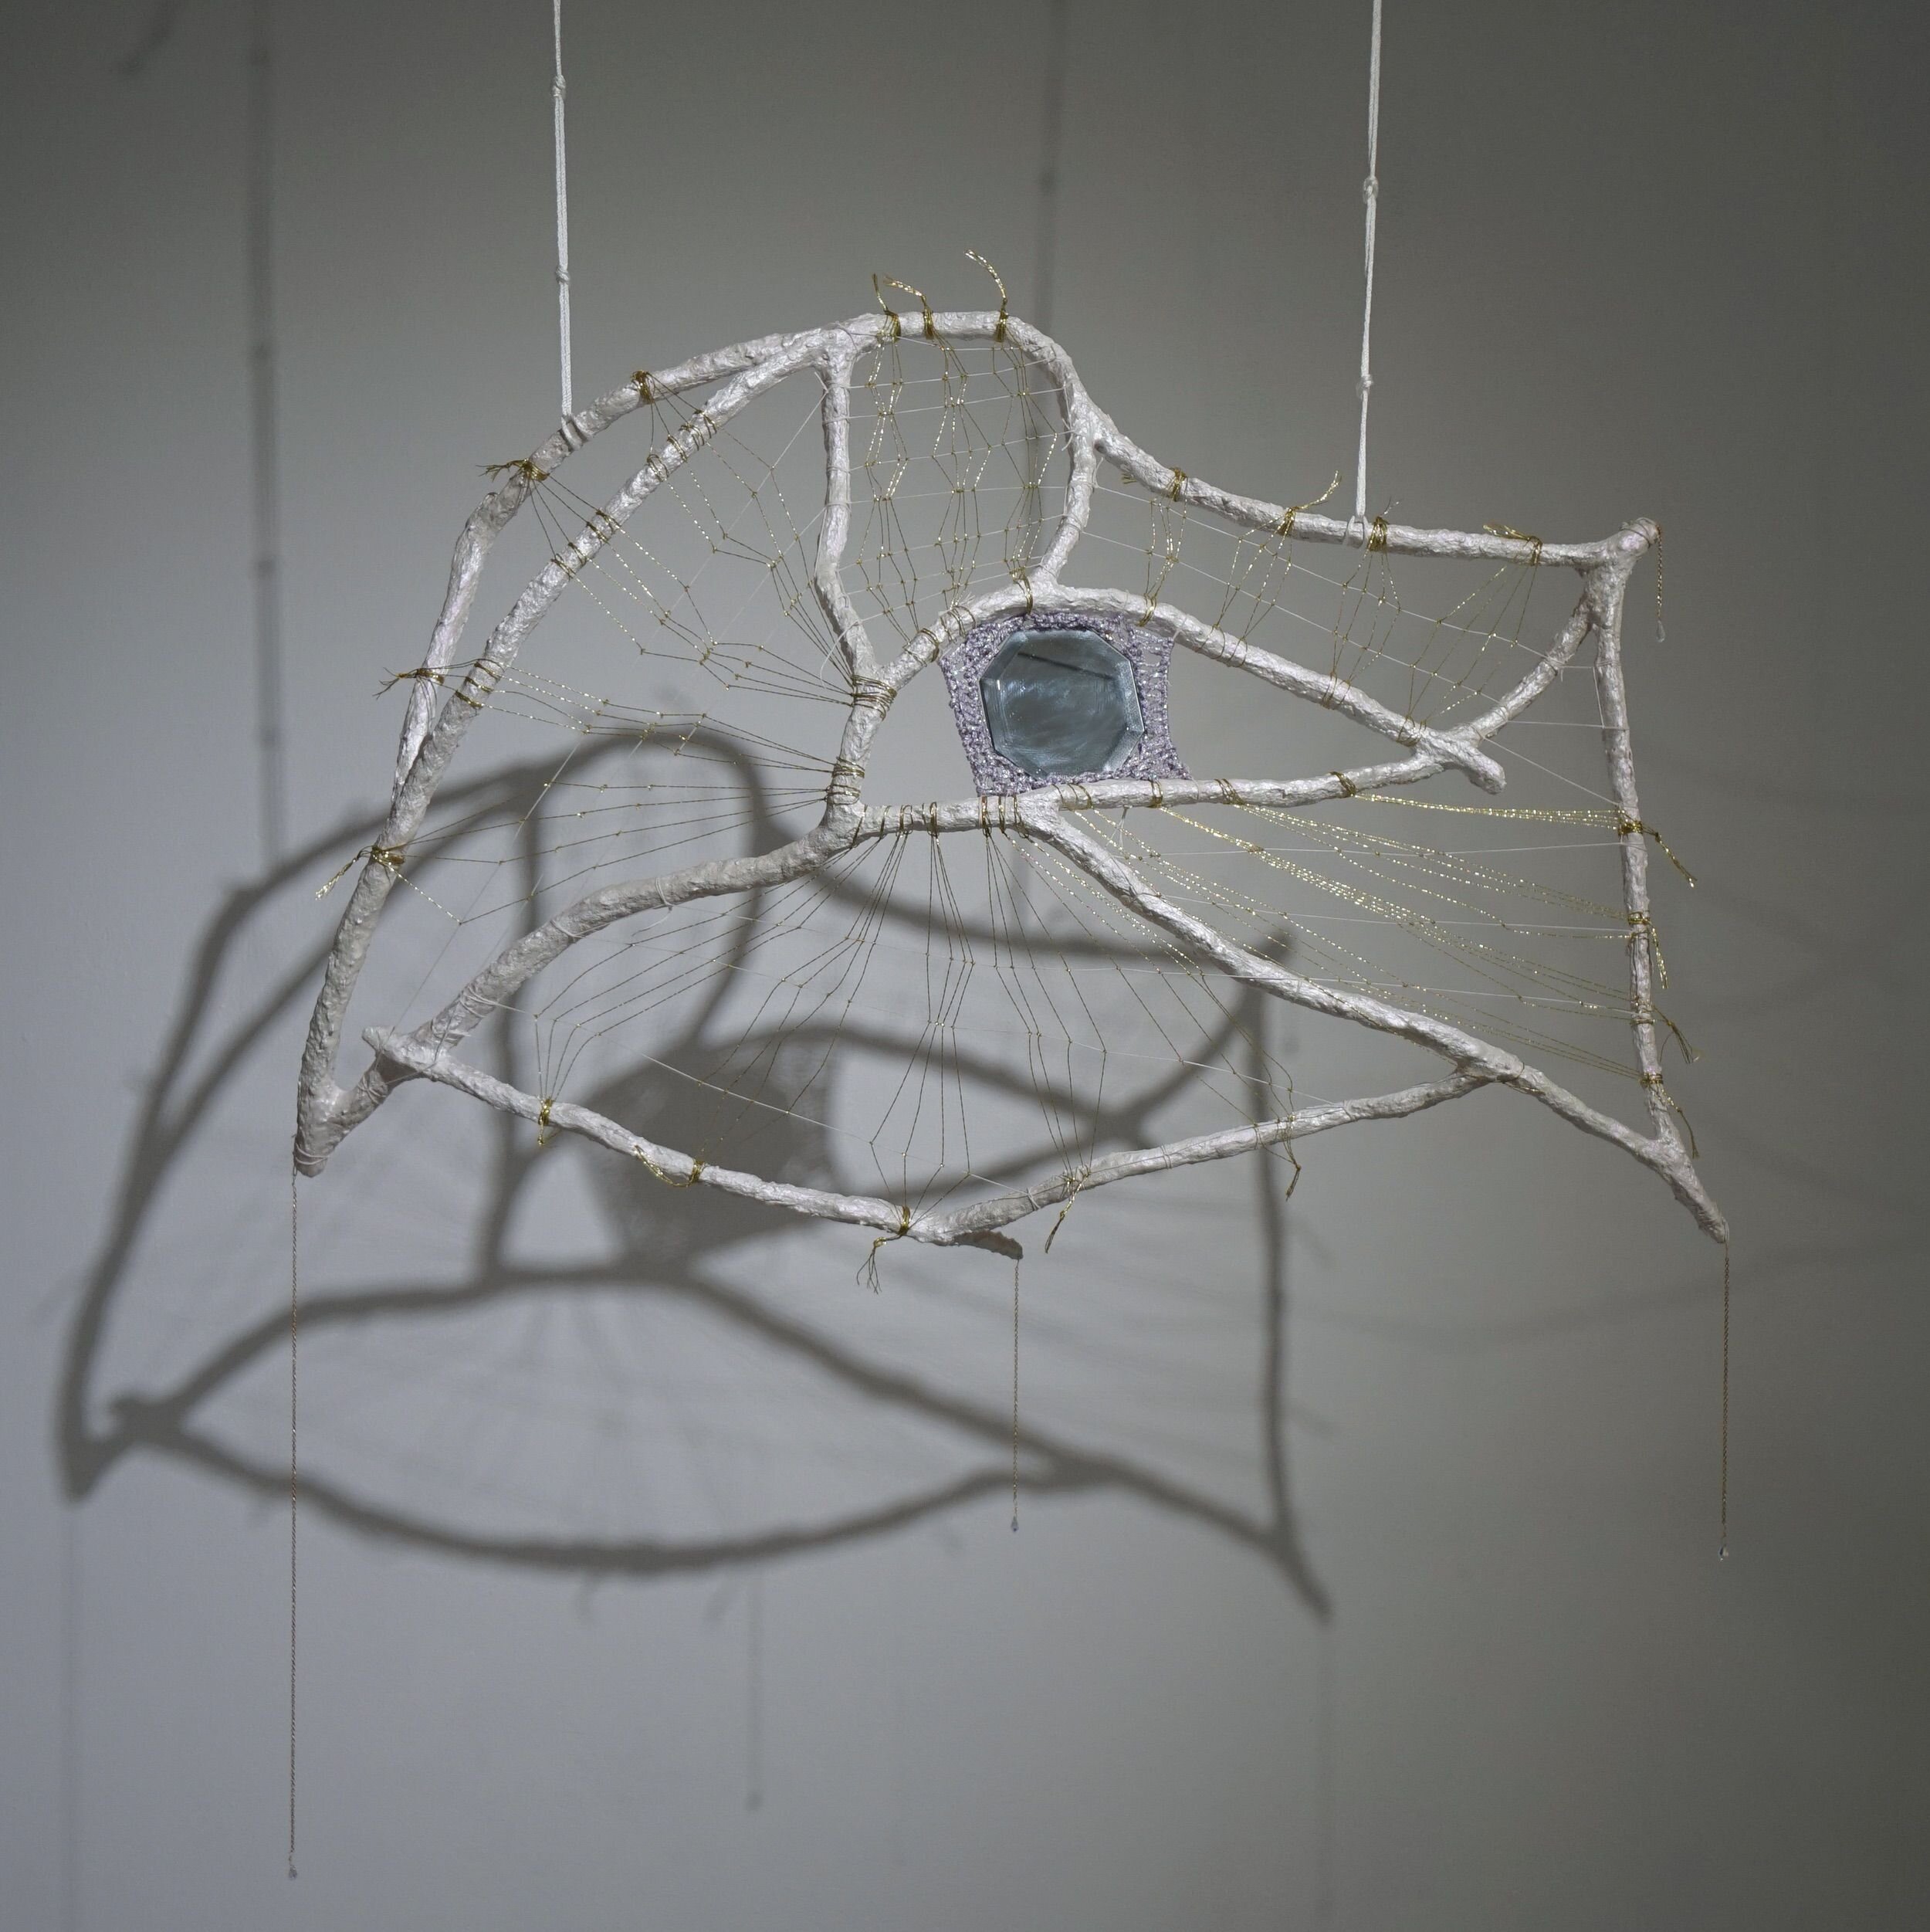  Mindy Rose Schwartz   Talisman , 2020 Branches, resin, wire, mirror, linen cord, lamé cord, crystals, wire, chain 43 x 36 x 7 in 109.2 x 91.4 x 17.8 cm 